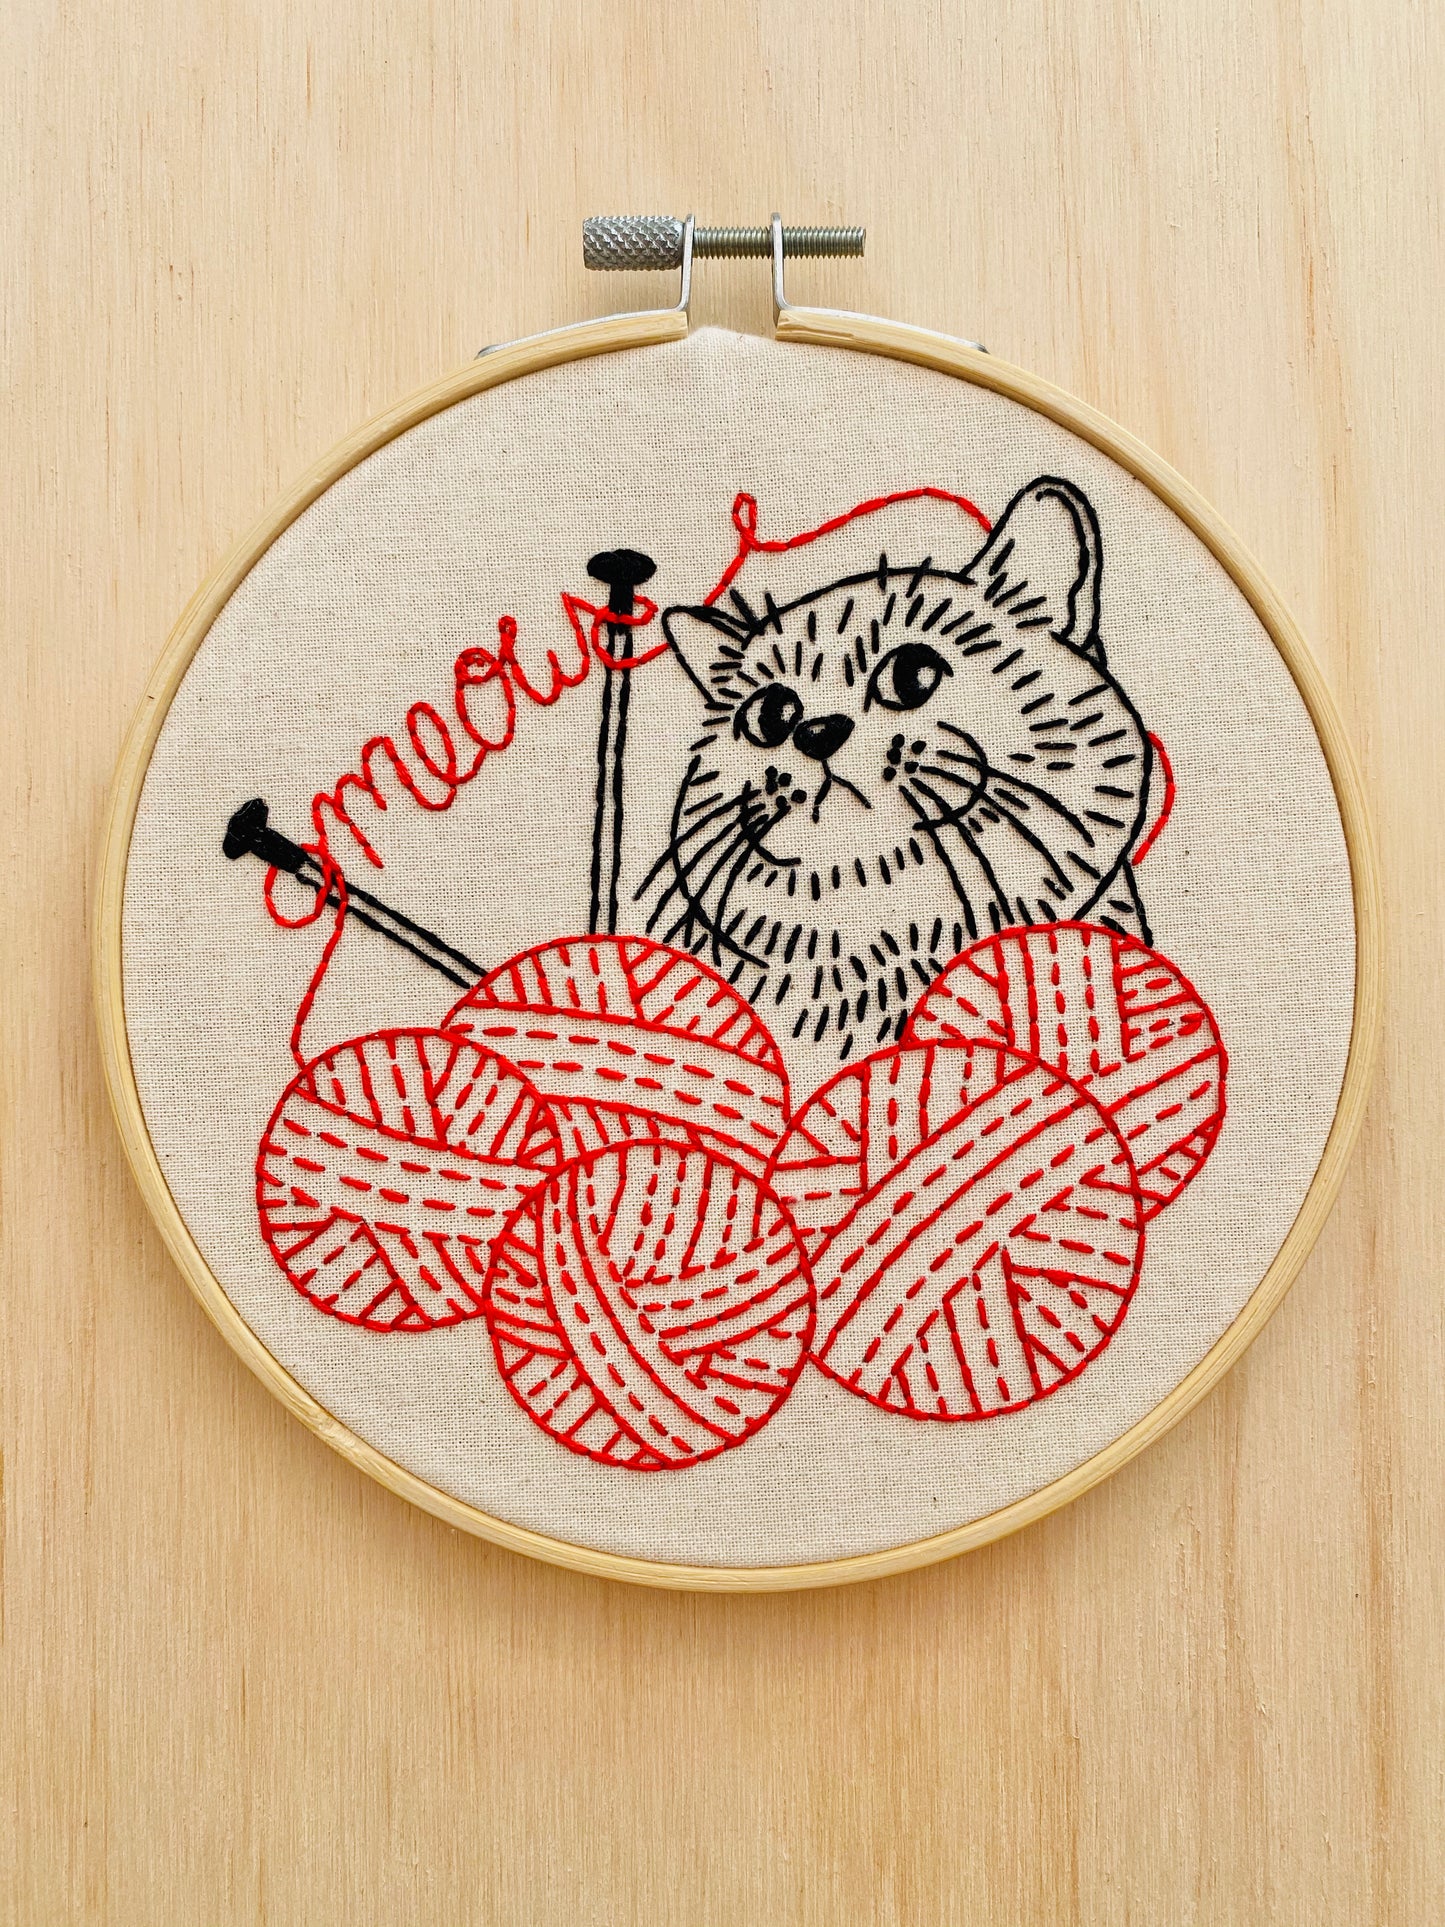 Pre-Printed Fabric: Kitten With Knitting